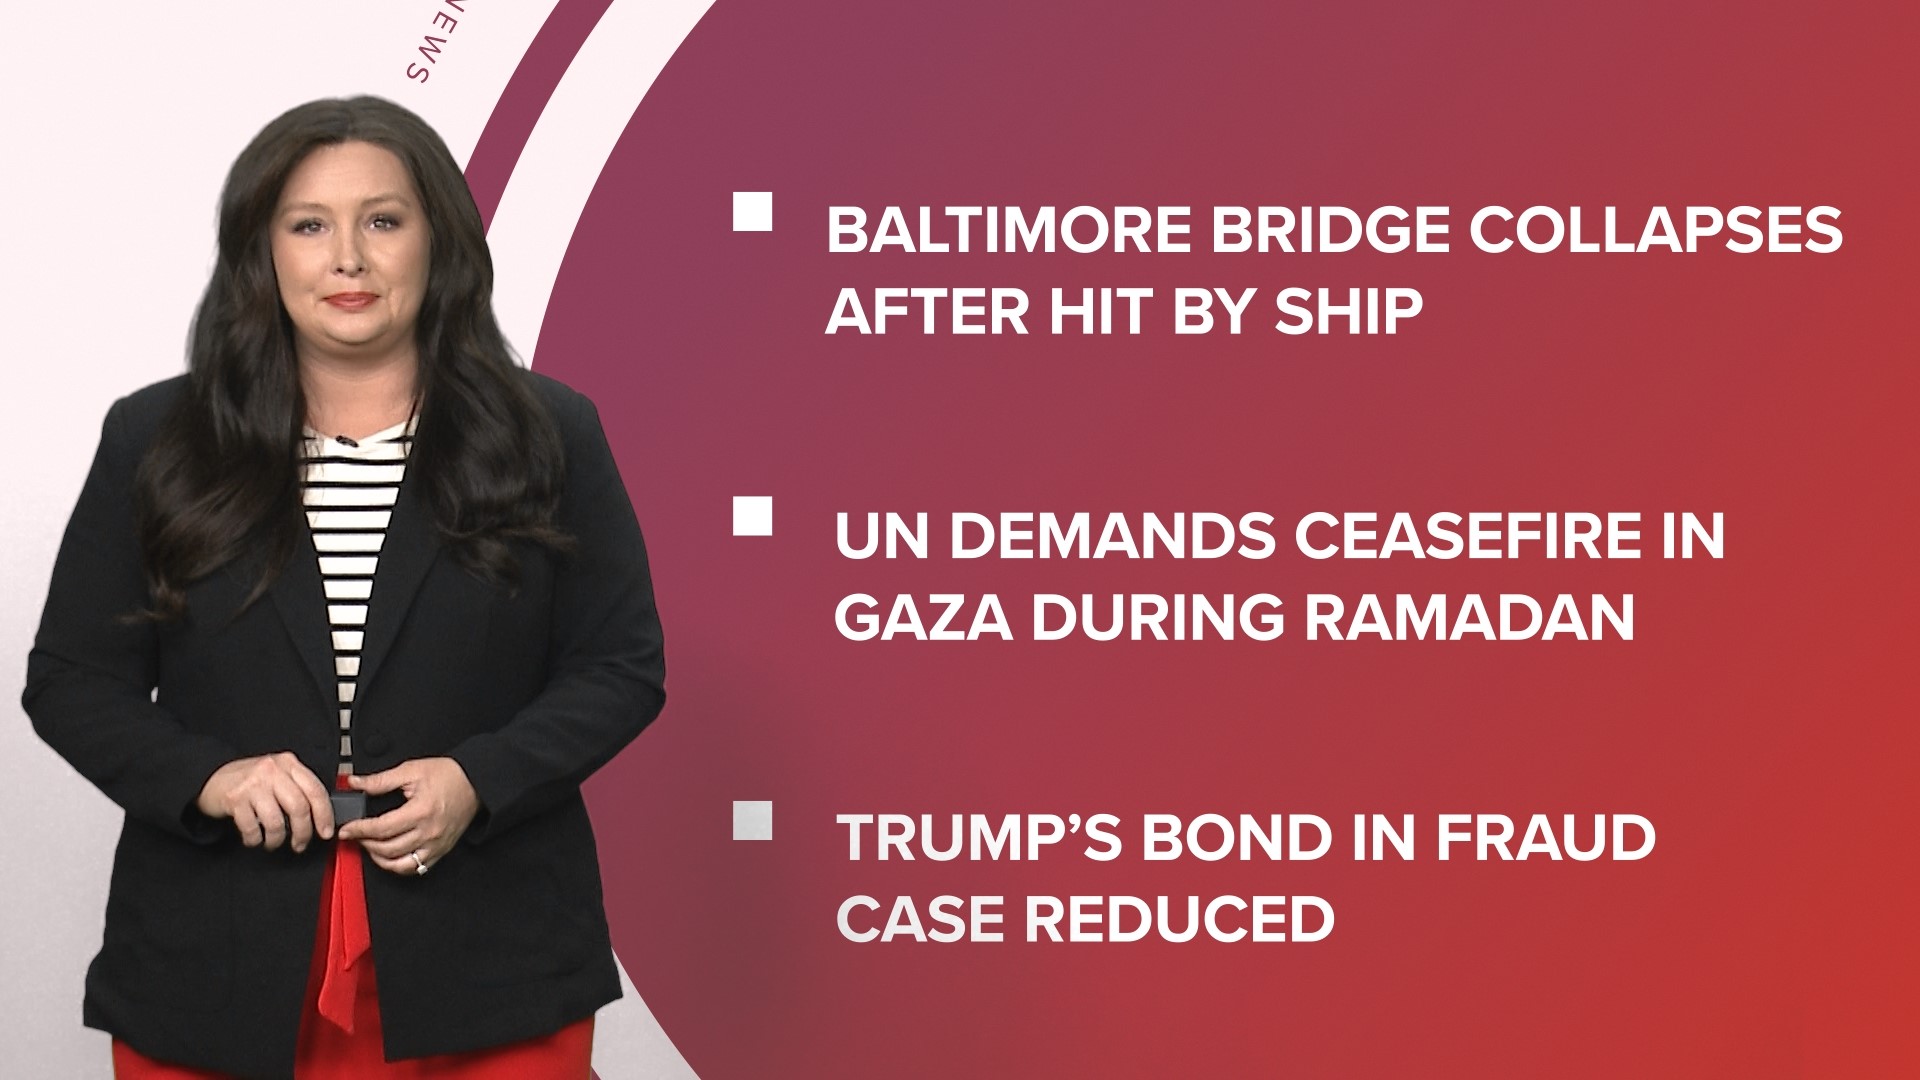 A look at what is happening in the news from a bridge collapses in Baltimore to updates on two Donald Trump cases and new Florida bill on kids and social media.